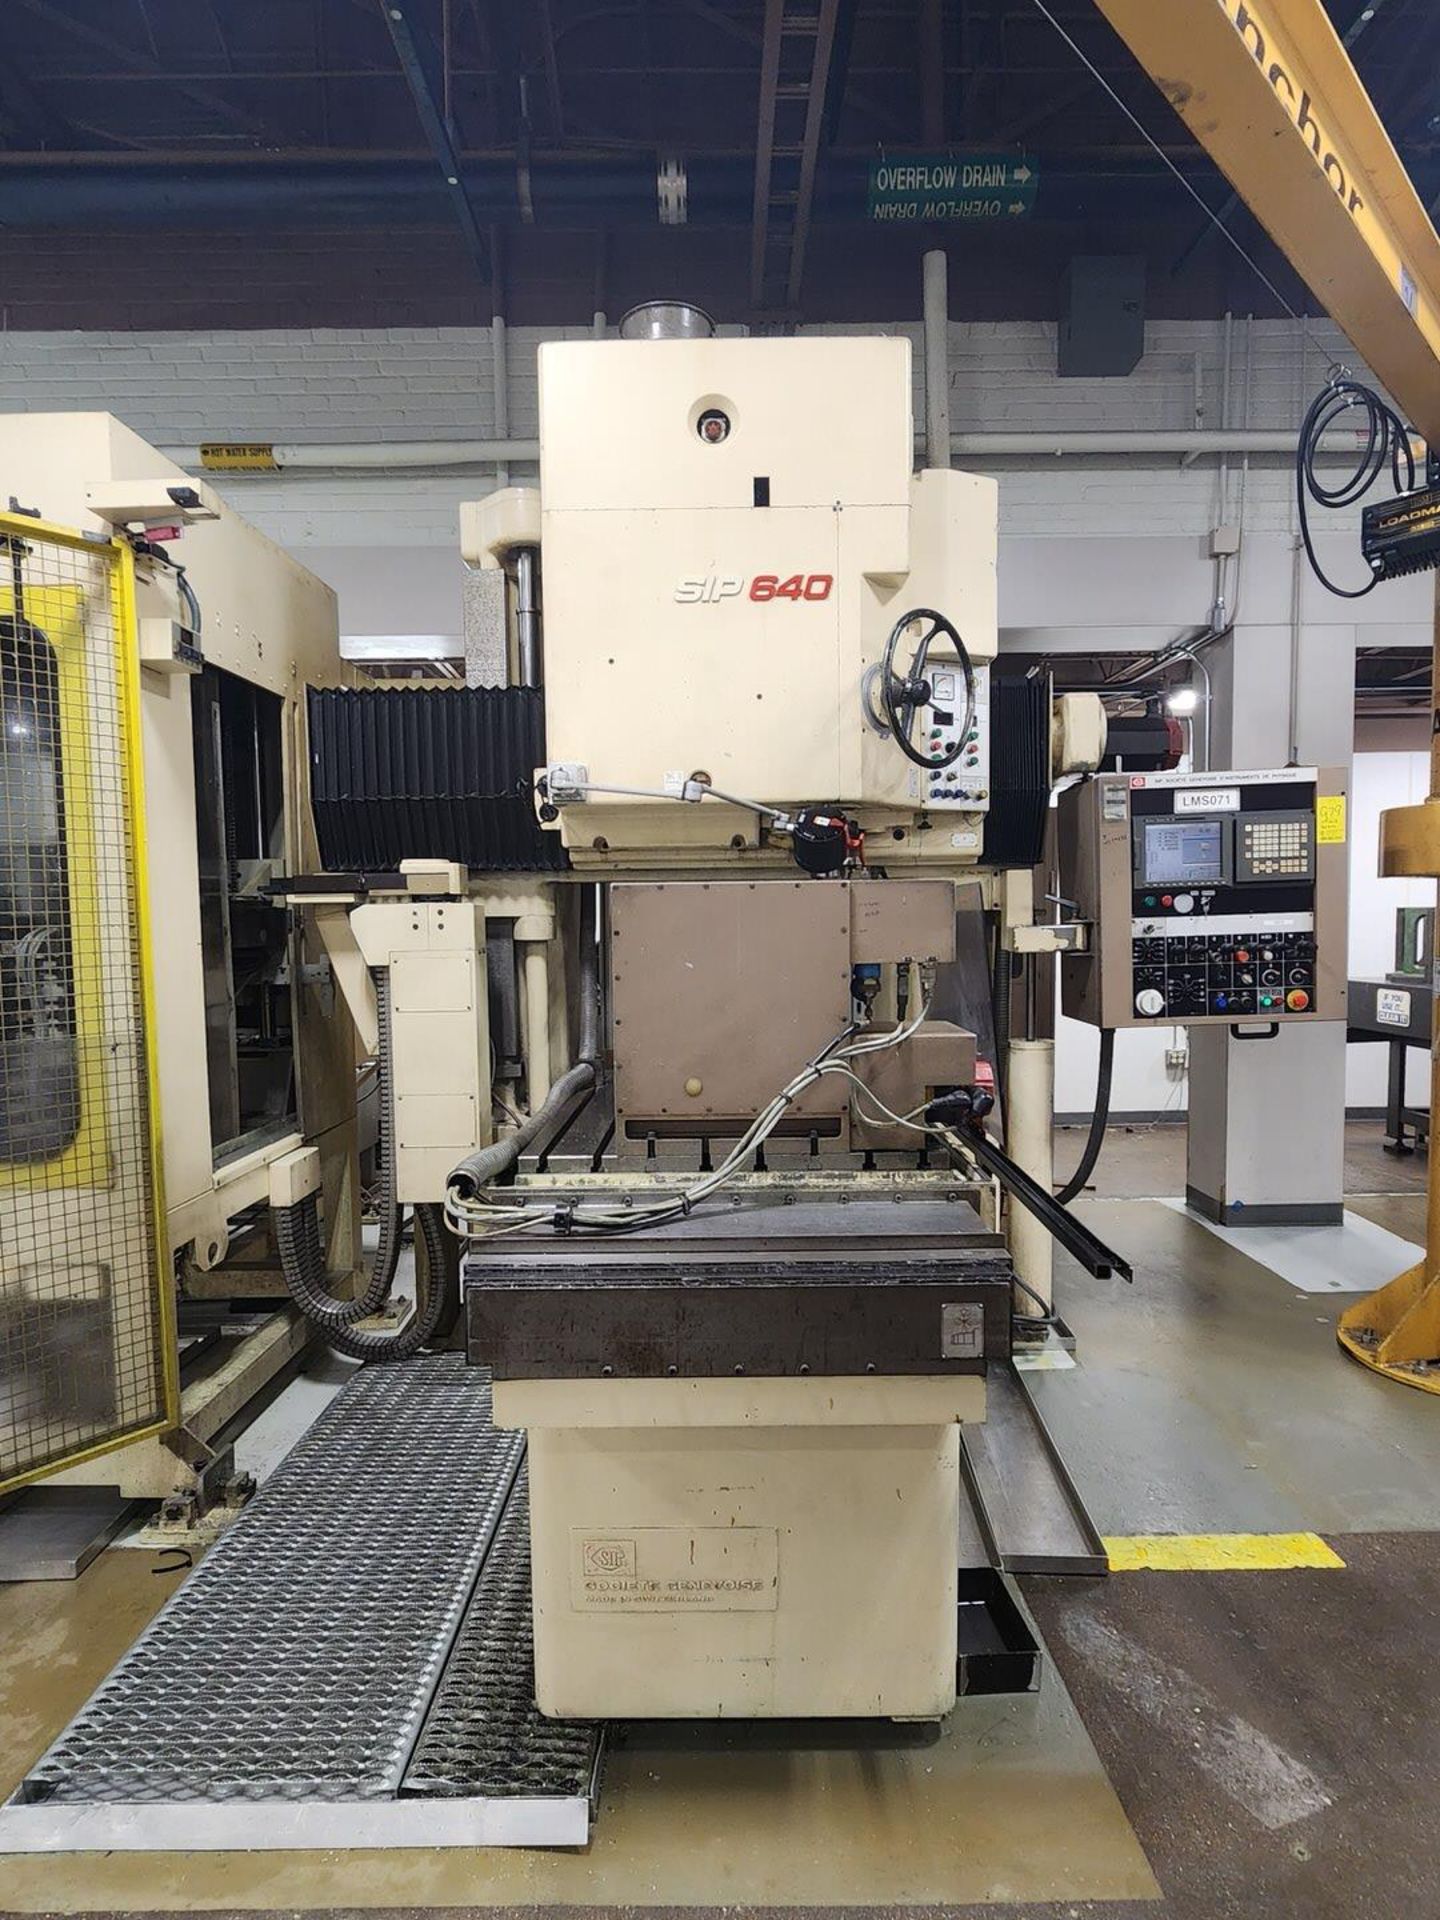 SIP SIP-640 Jig Boring Machine W/ Fanuc Series 16i-M Controller; Cutting Time: 15,304hrs - Image 4 of 36